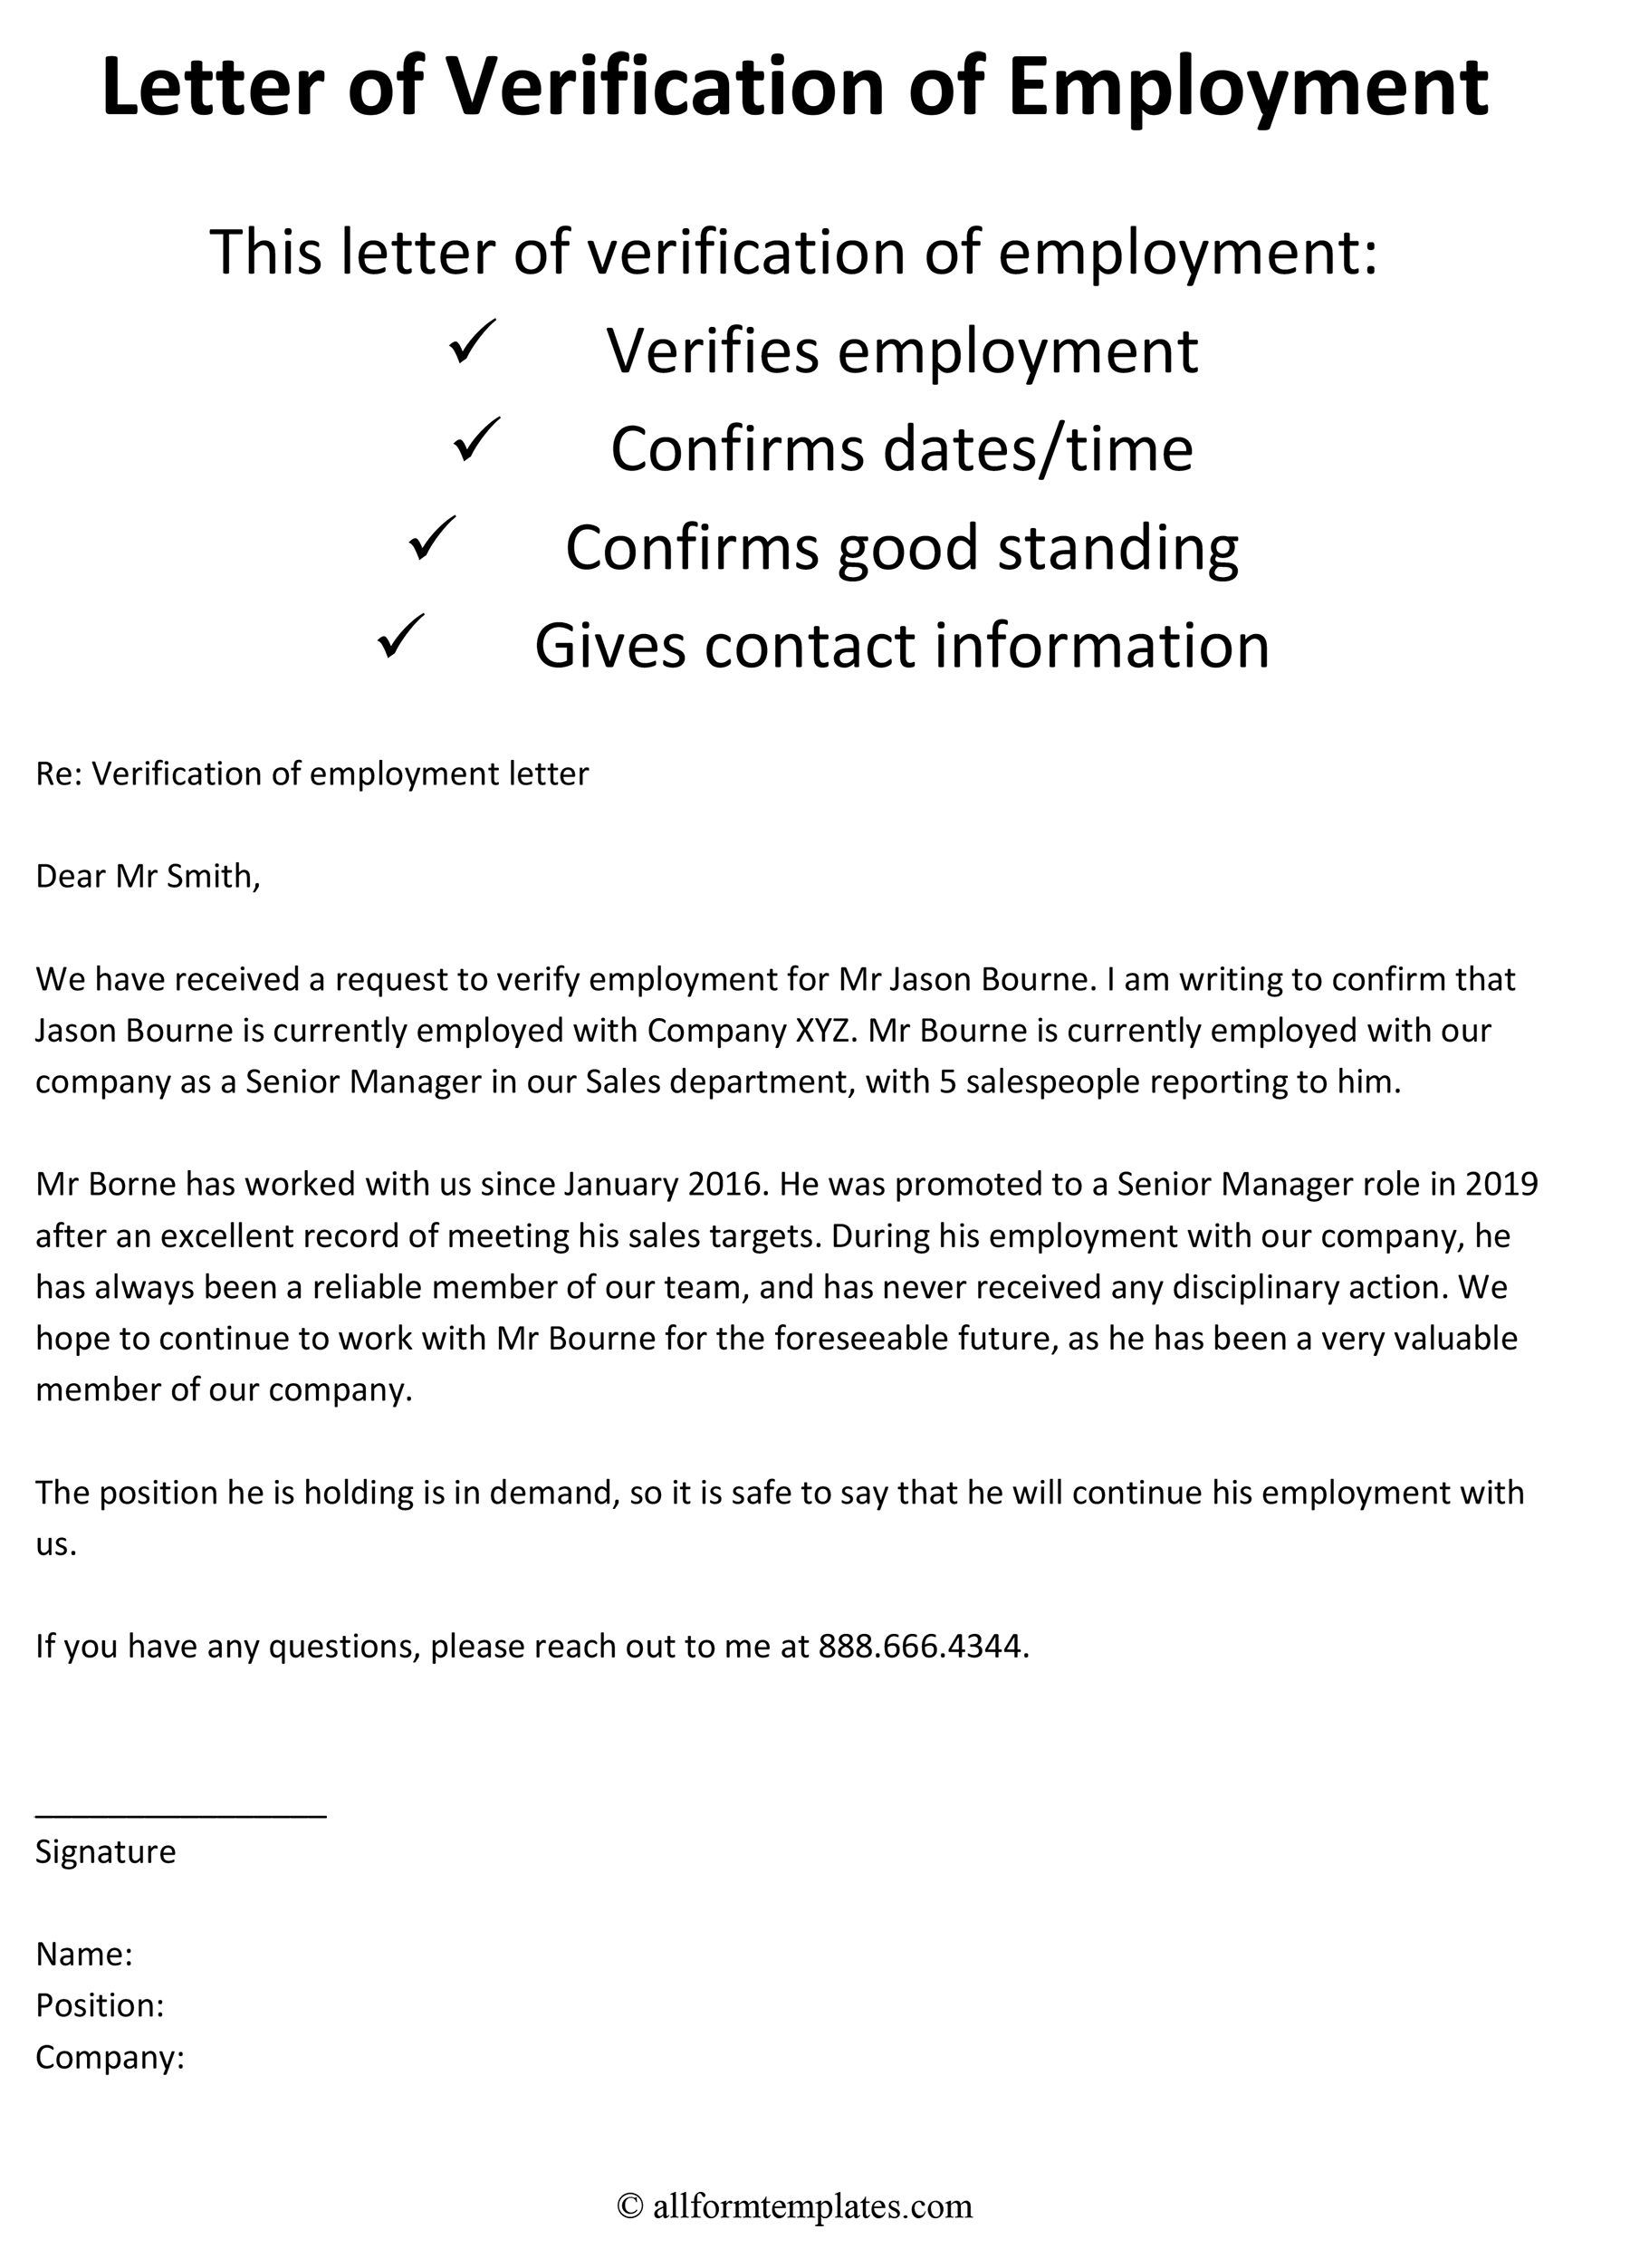 Letter of Verification of Employment